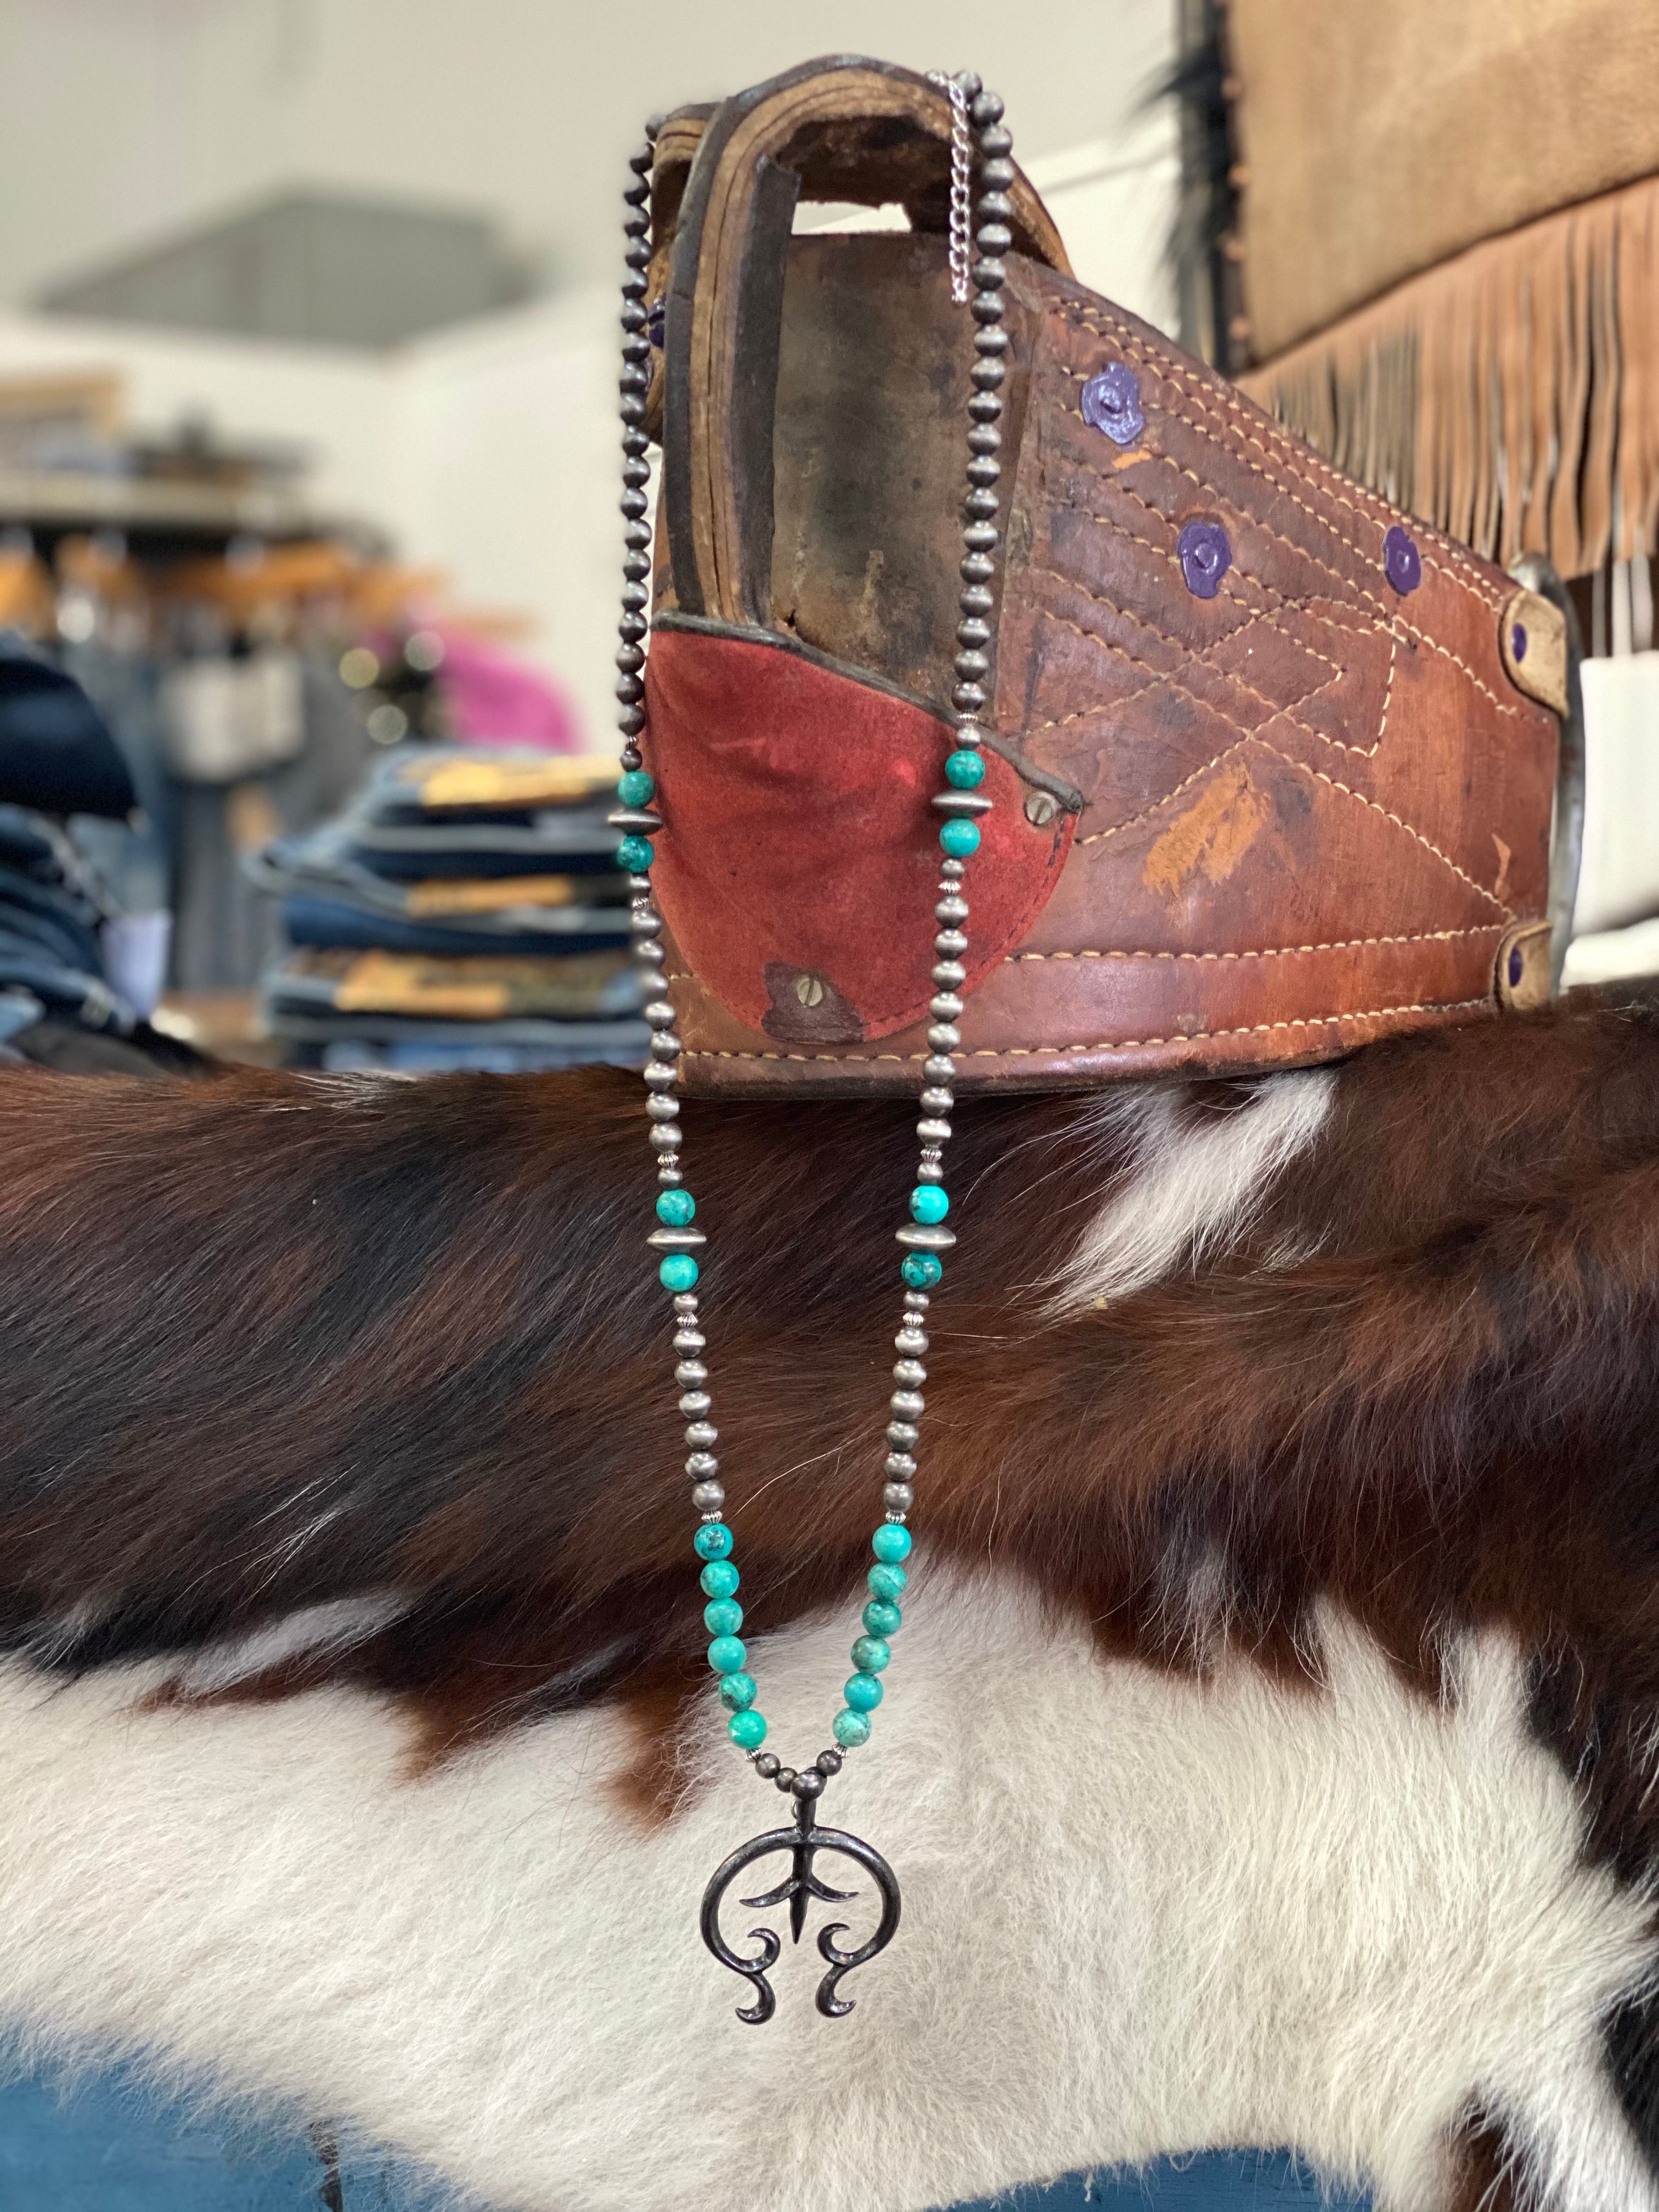 Navajo Pearl Necklace with Naja and Turquoise Accent - Pistols and Petticoats